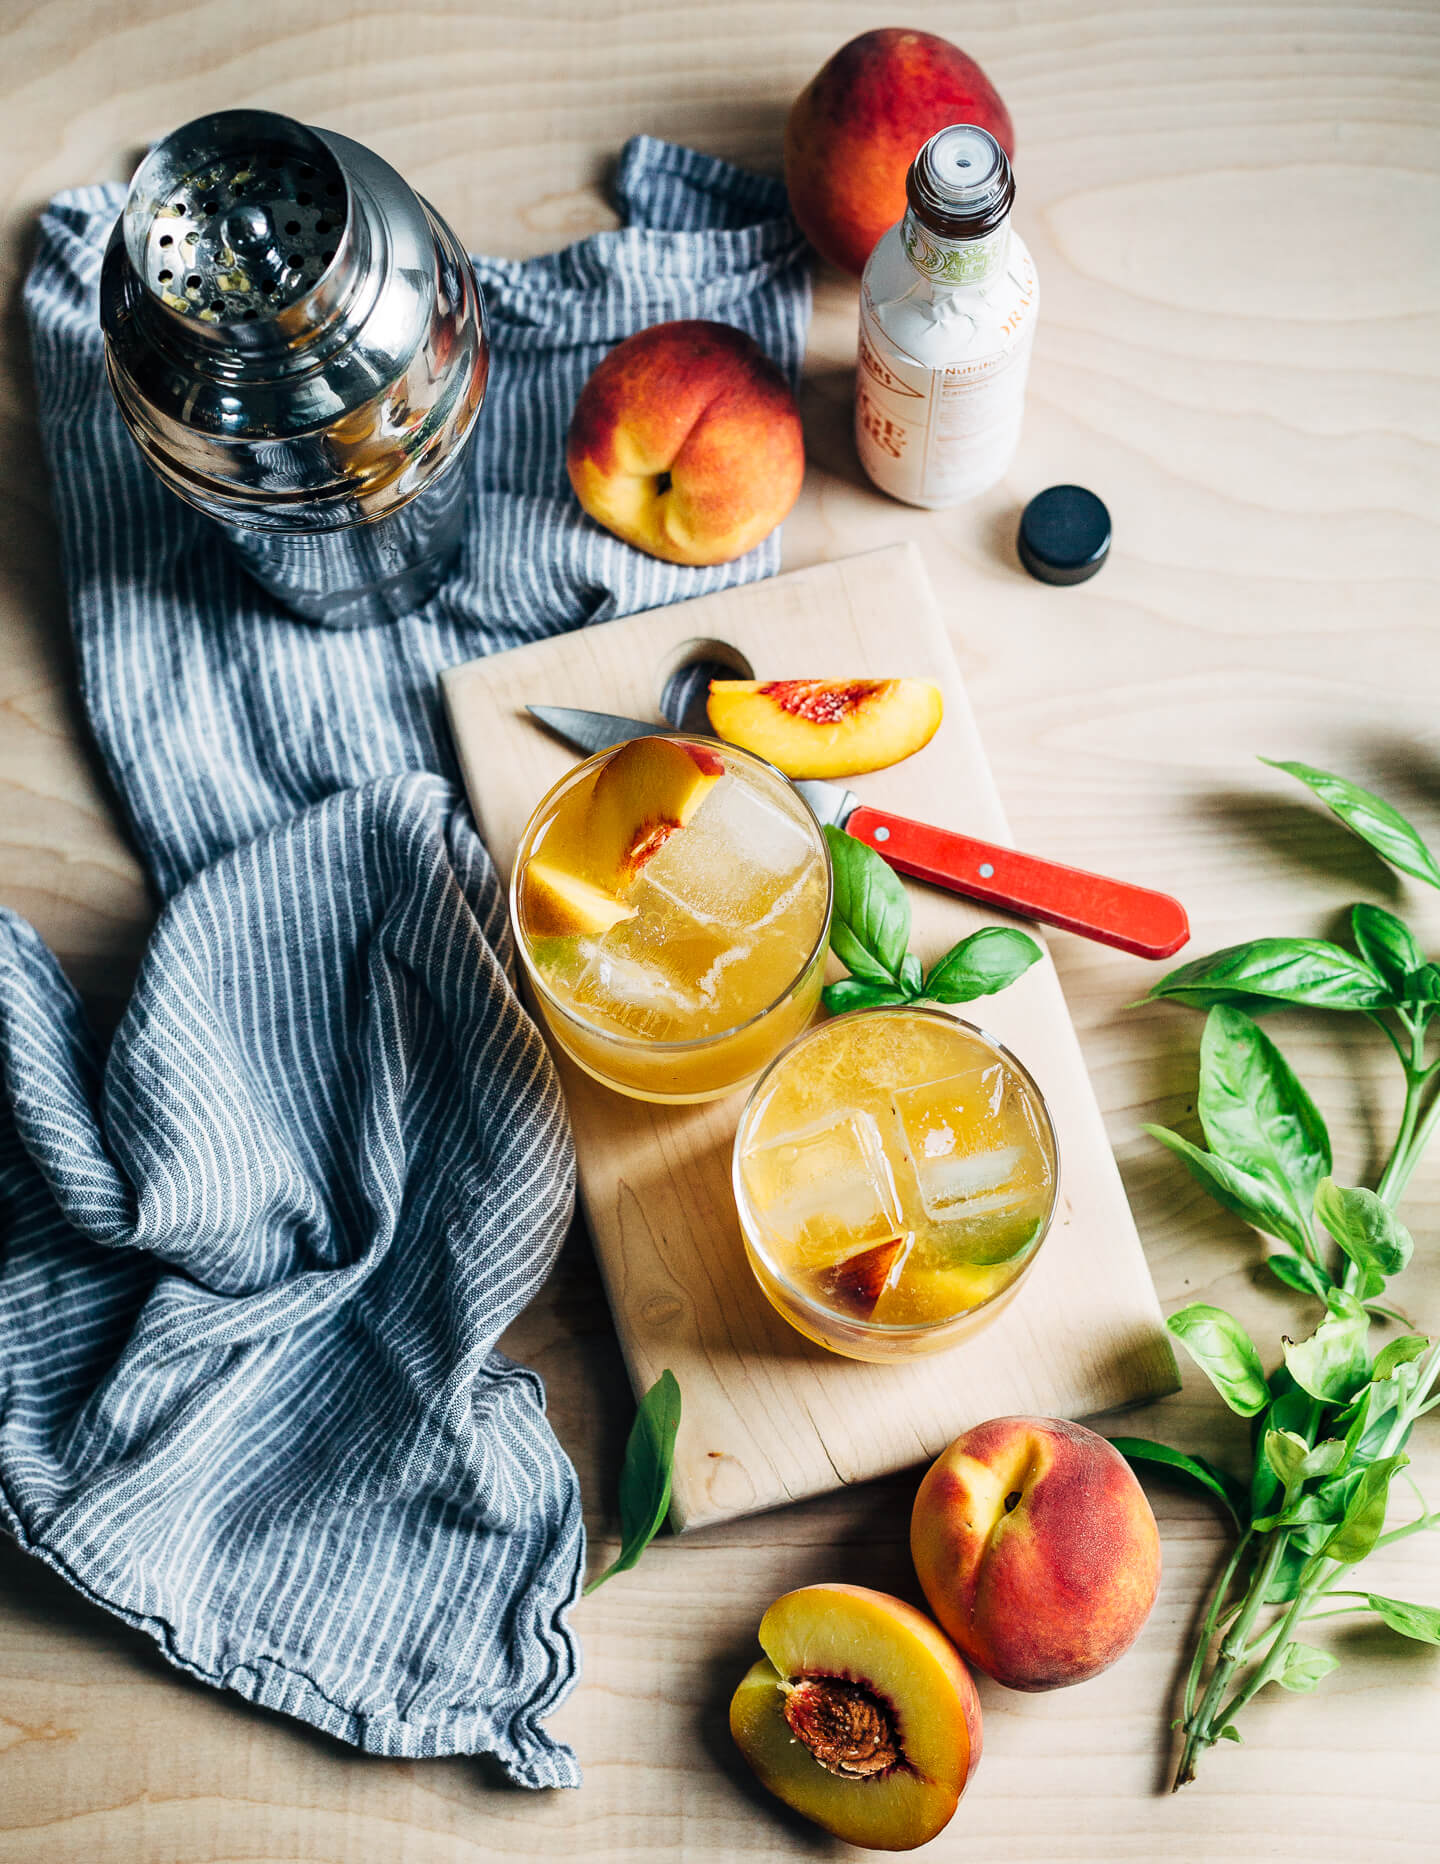 Peach bourbon smash cocktails infused with fresh basil leaves are bright, lemony, and the perfect way to enjoy sweet summer peaches. 